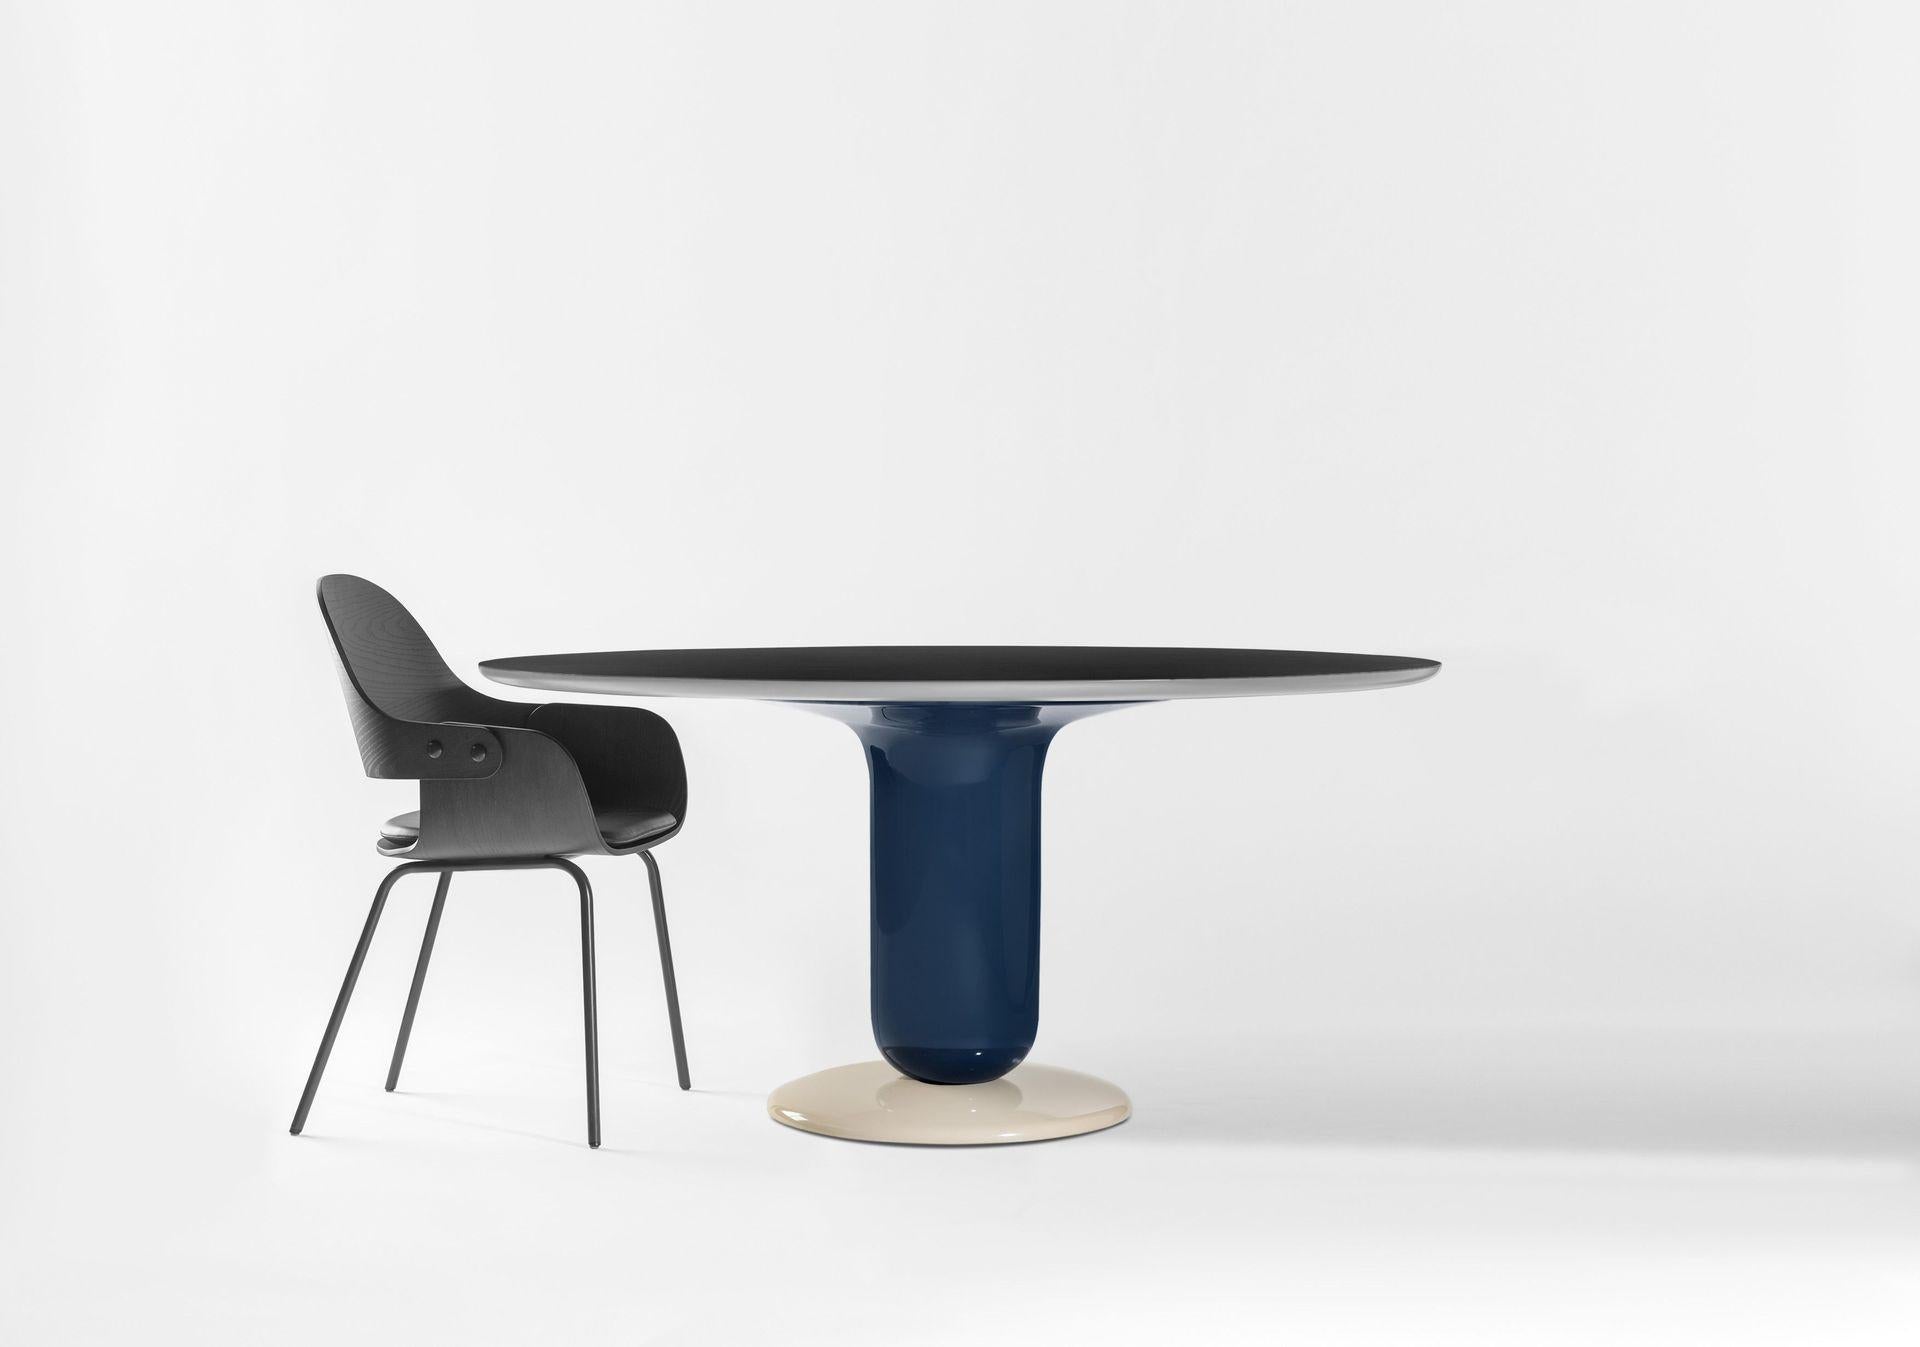 Table designed by Jaime Hayon in 2021, added to the Explorer collection that started in 2019.
Manufactured by BD Barcelona in Spain.

As a continuation of the playful Explorer Table series and following its elegant beauty, we are proud to introduce